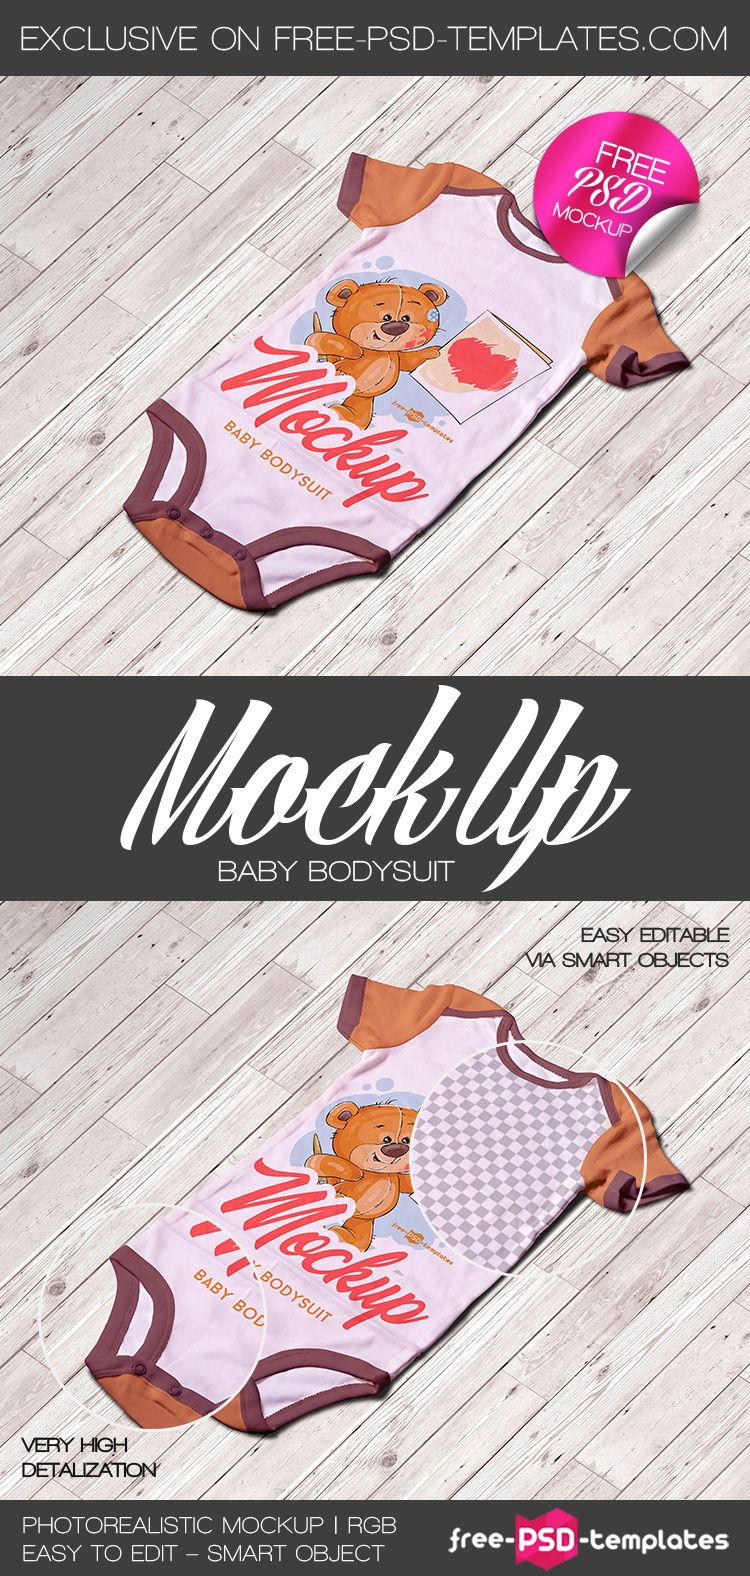 Download Free Baby Bodysuit Mock Up In Psd Free Psd Templates